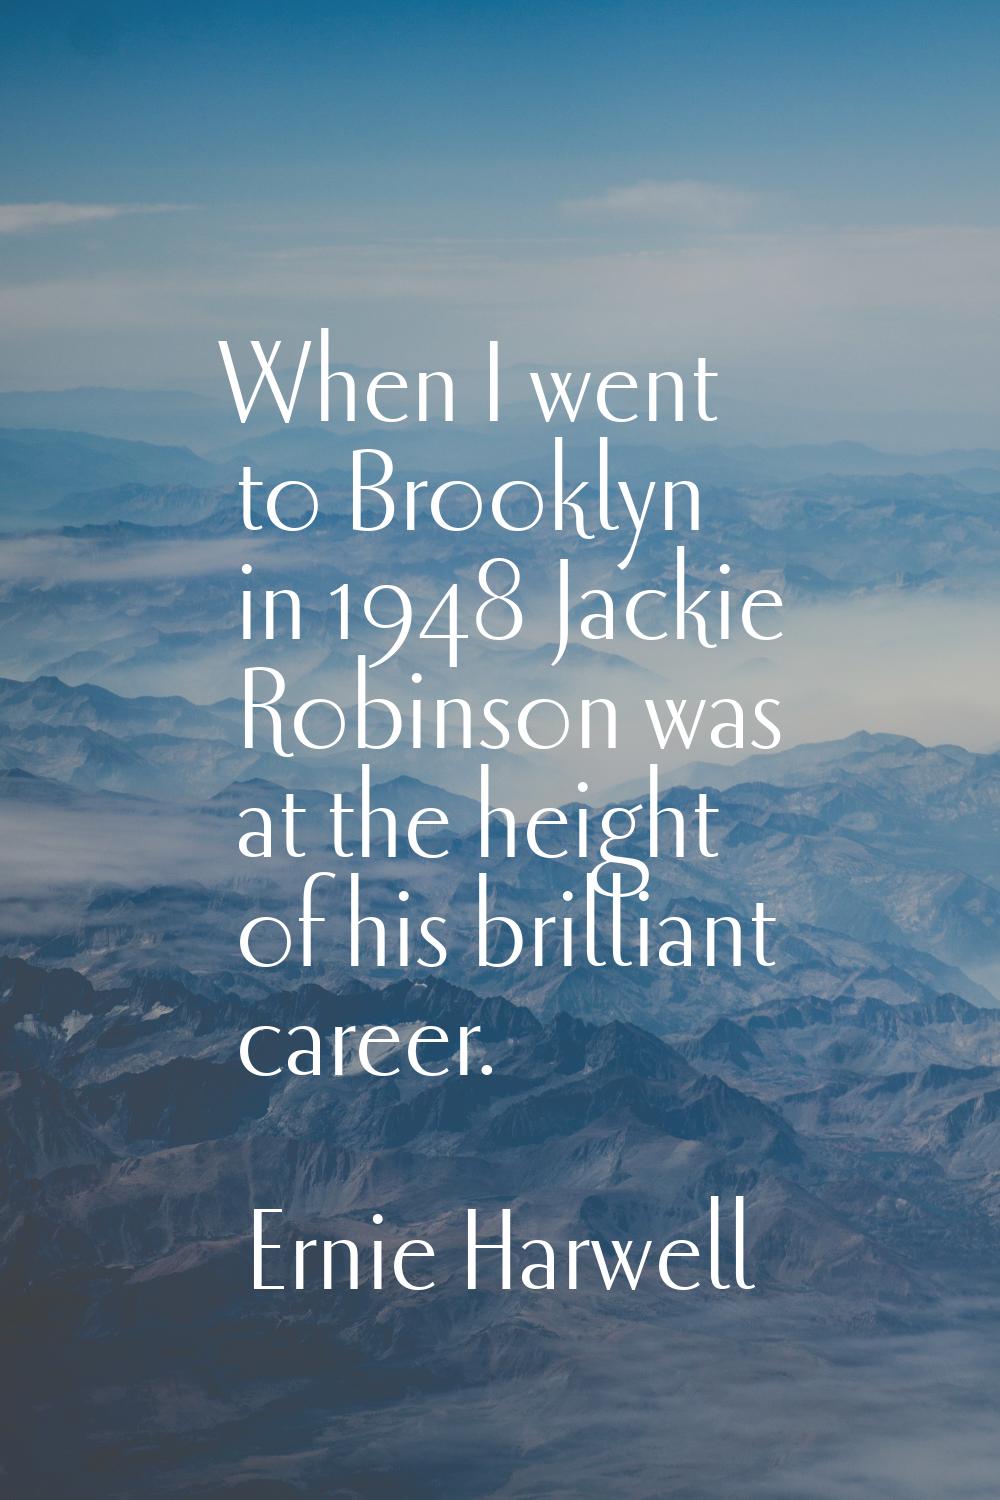 When I went to Brooklyn in 1948 Jackie Robinson was at the height of his brilliant career.